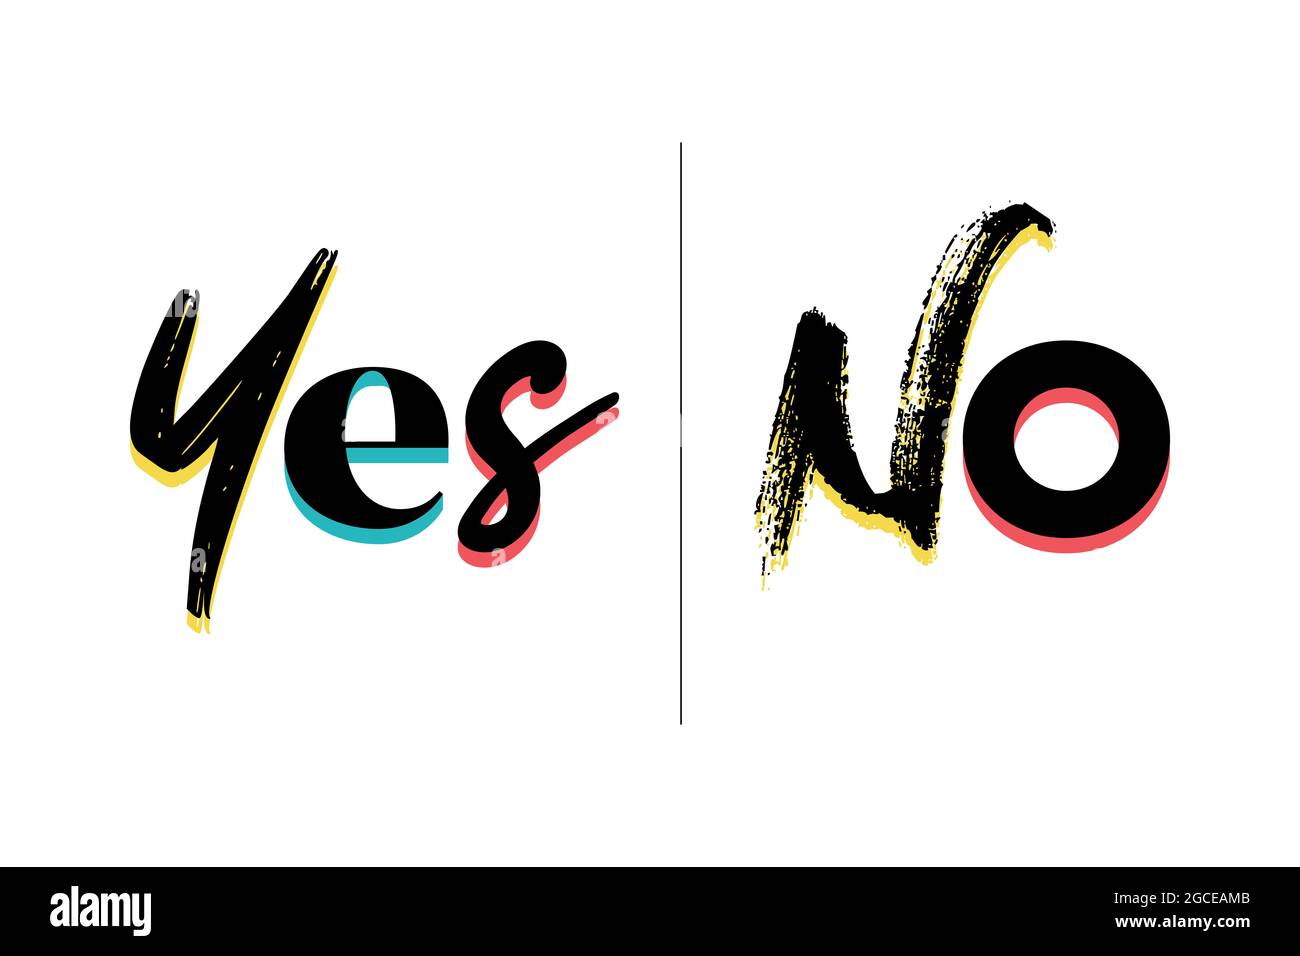 Modern, creative, colorful typographic graphic design of a word 'Yes, No' in yellow, red, blue and black colors. Vibrant, urban, cool, trendy graphic Stock Photo